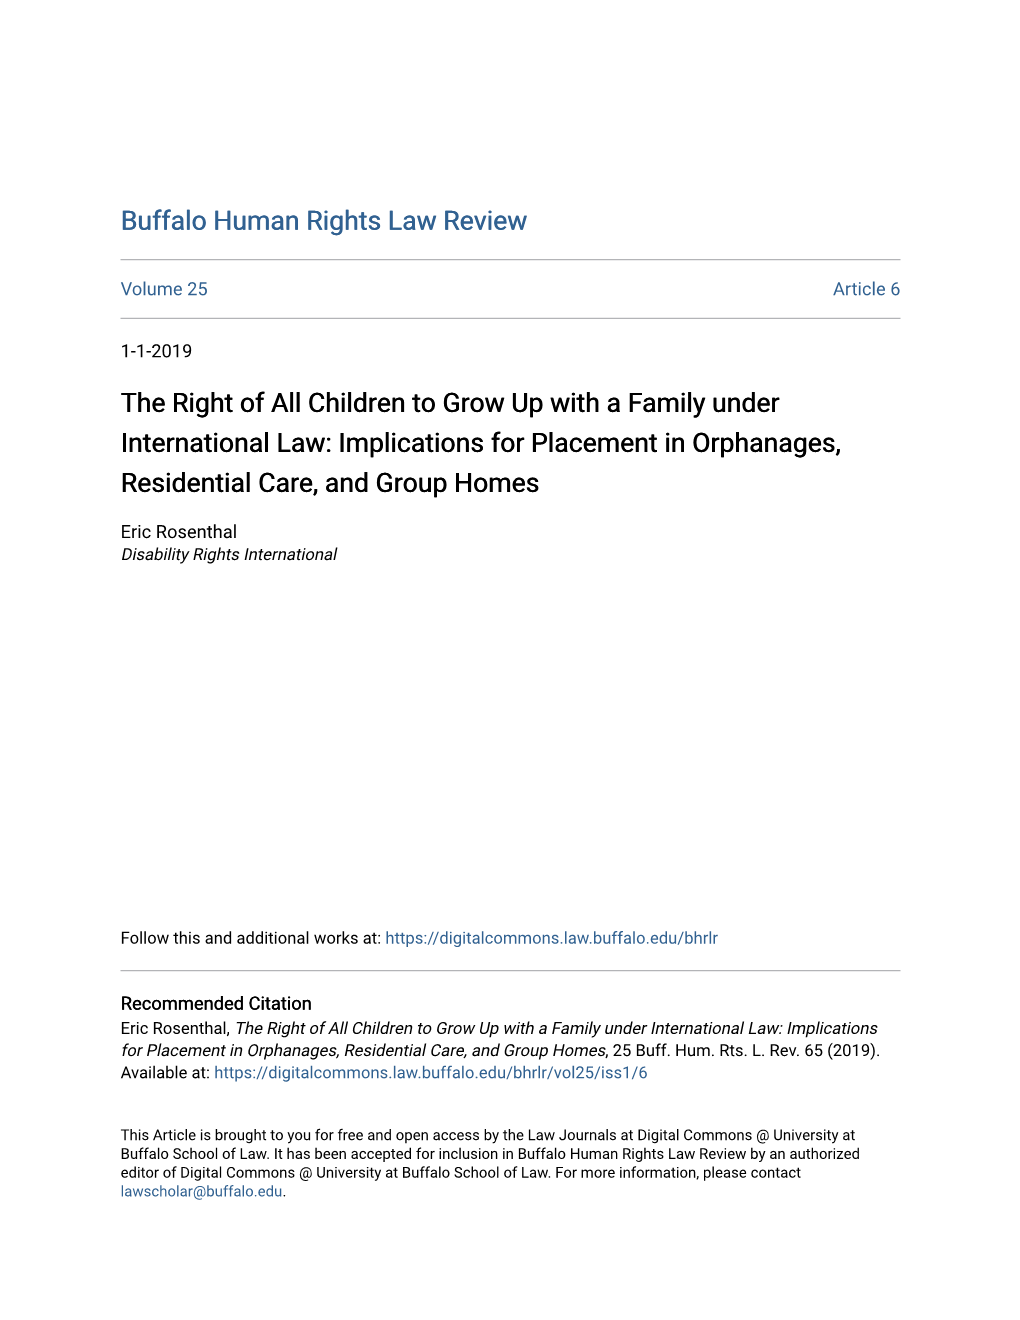 The Right of All Children to Grow up with a Family Under International Law: Implications for Placement in Orphanages, Residential Care, and Group Homes